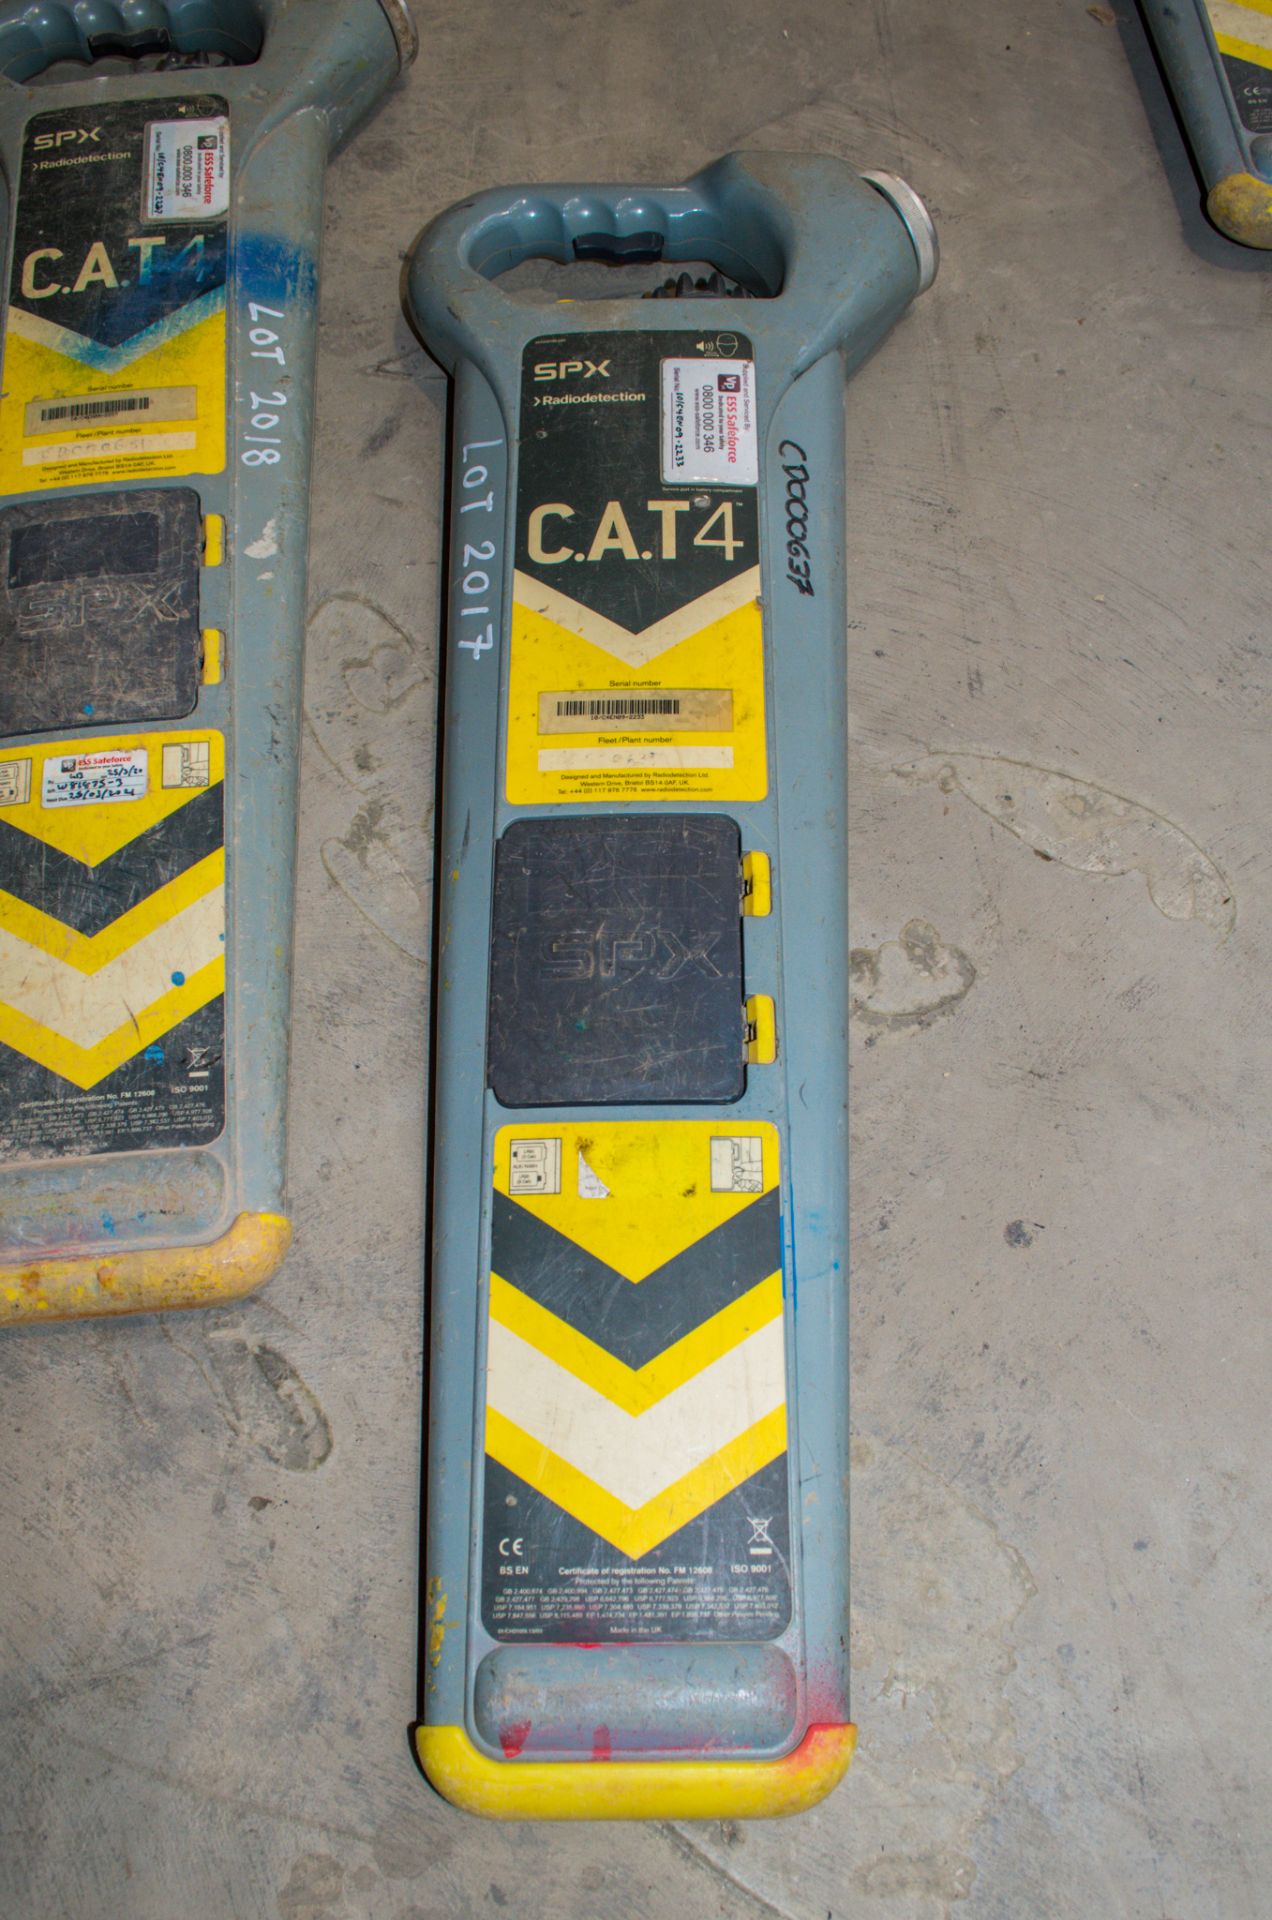 Radiodetection CAT4 cable avoidance tool CD000637